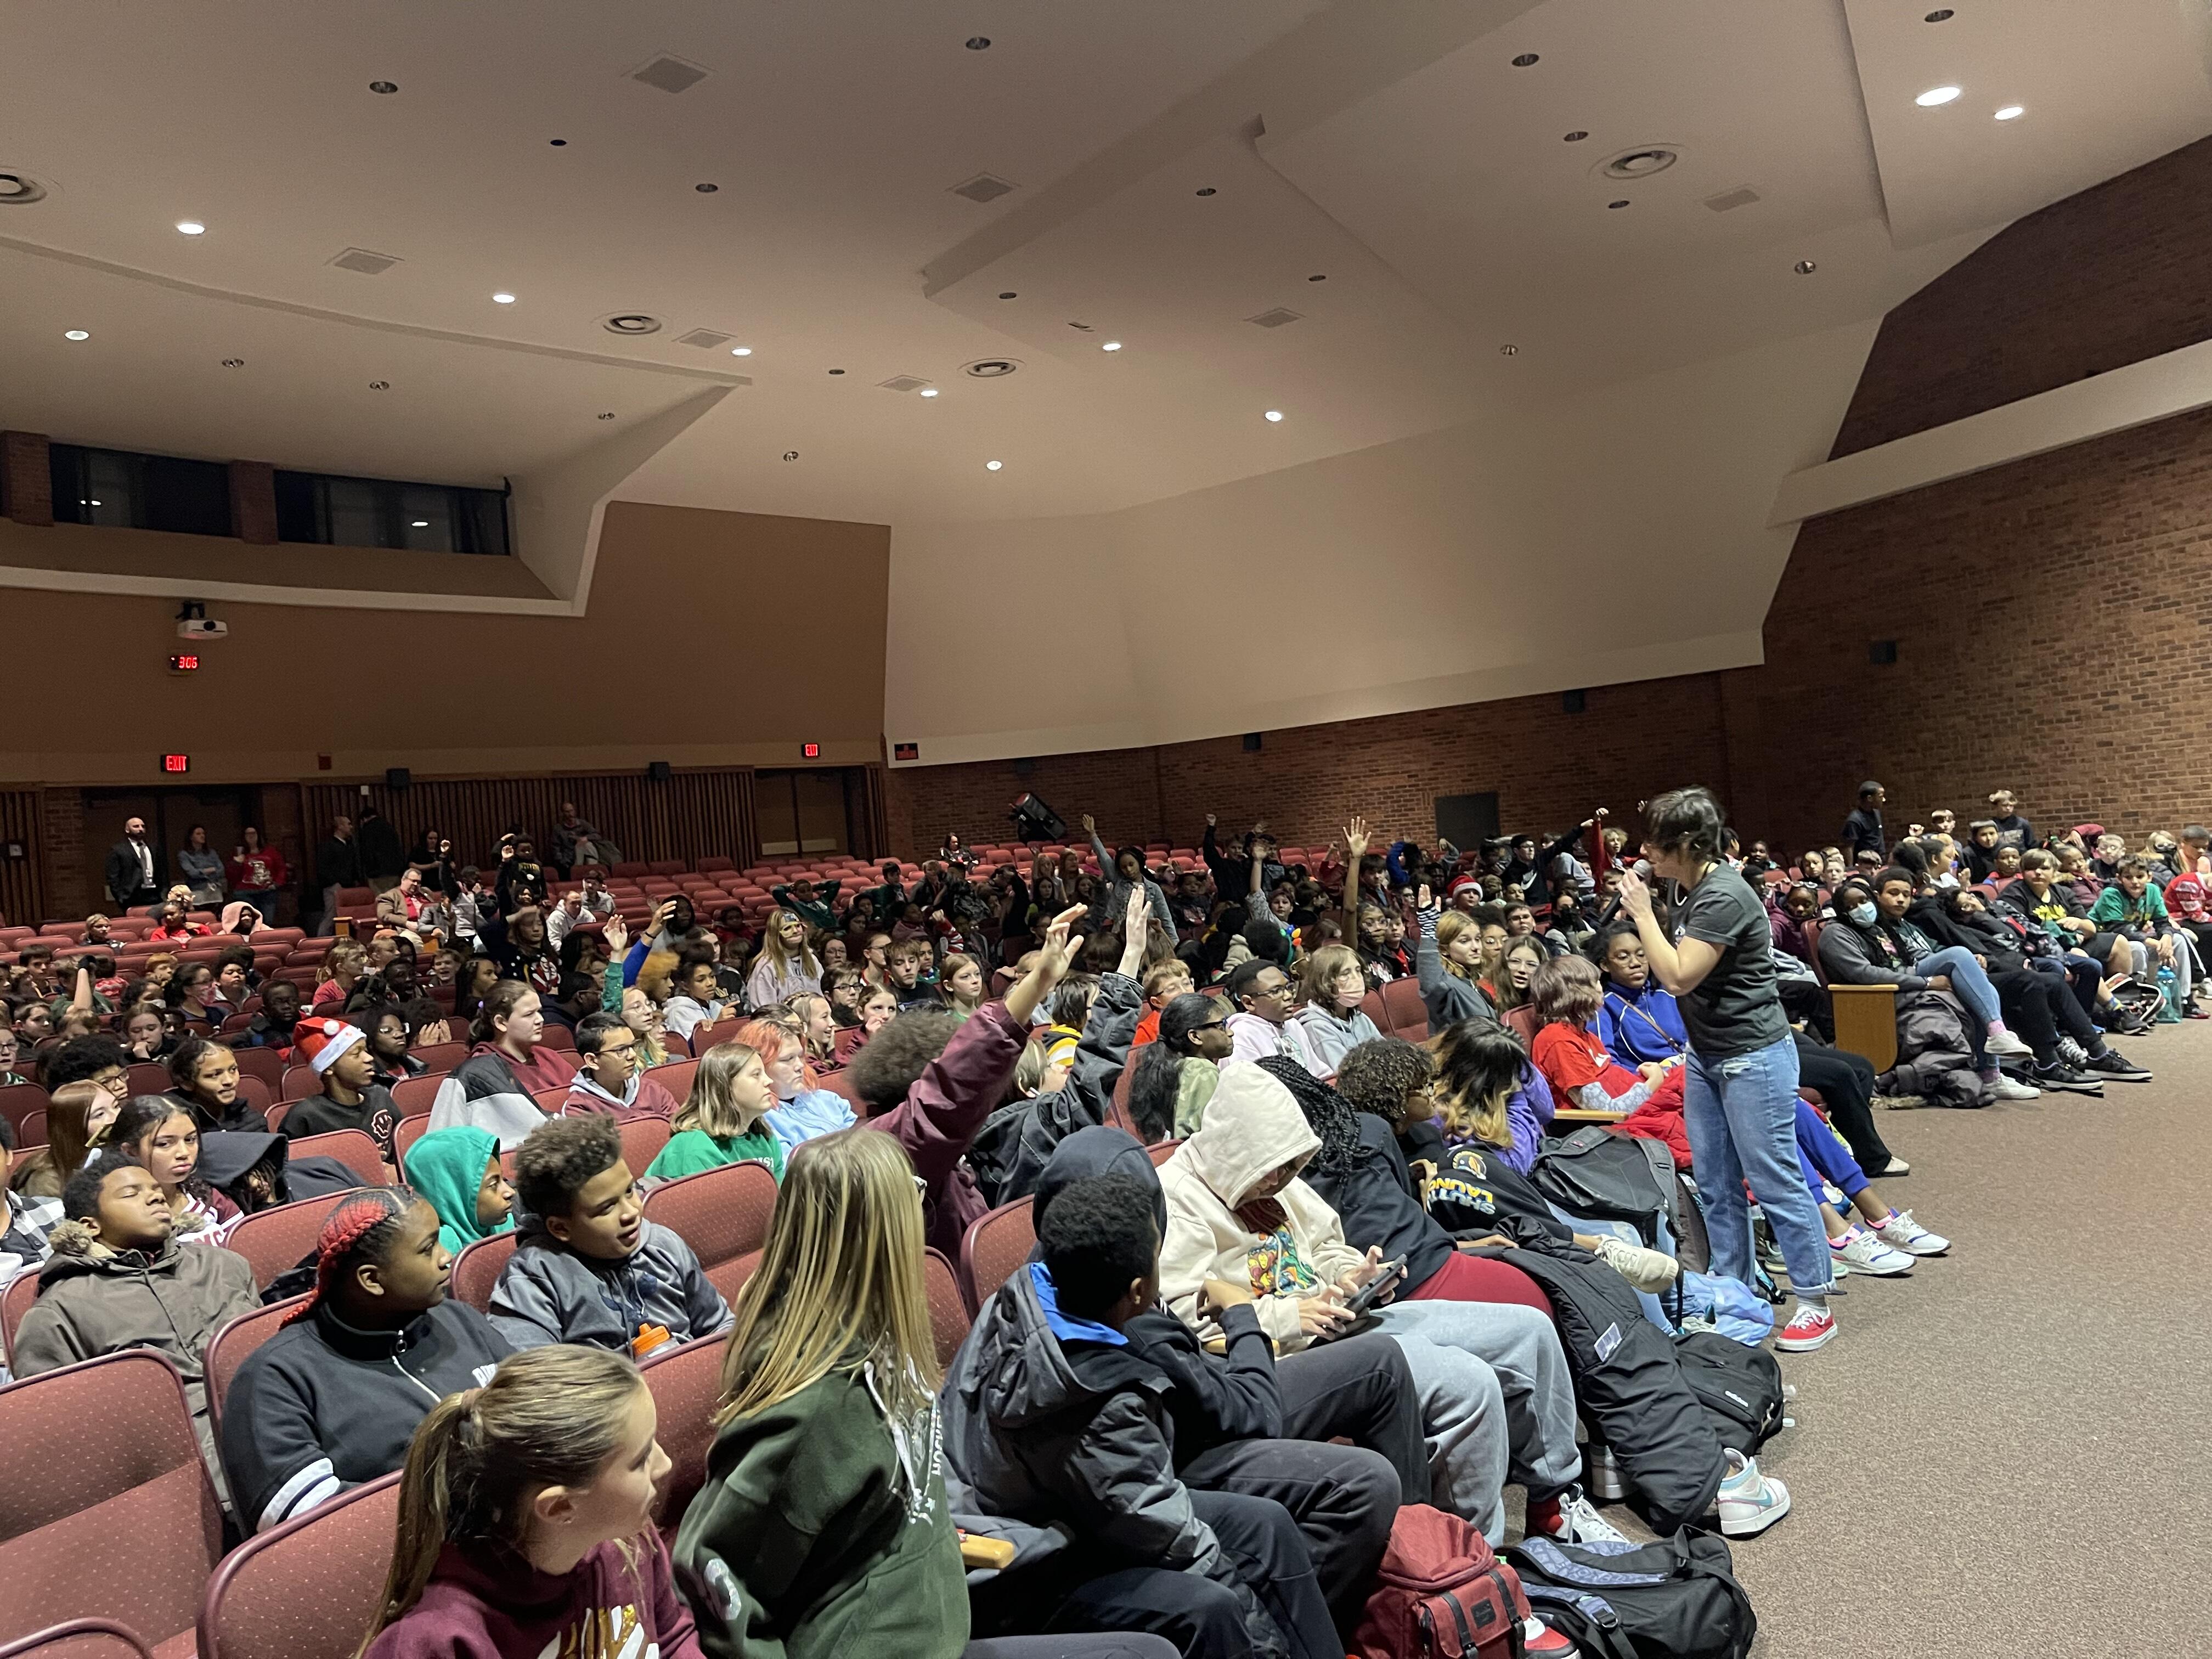 Middle school students seated in an auditorium watch a performance of Josh & Gab, a musical duo with a positive message.